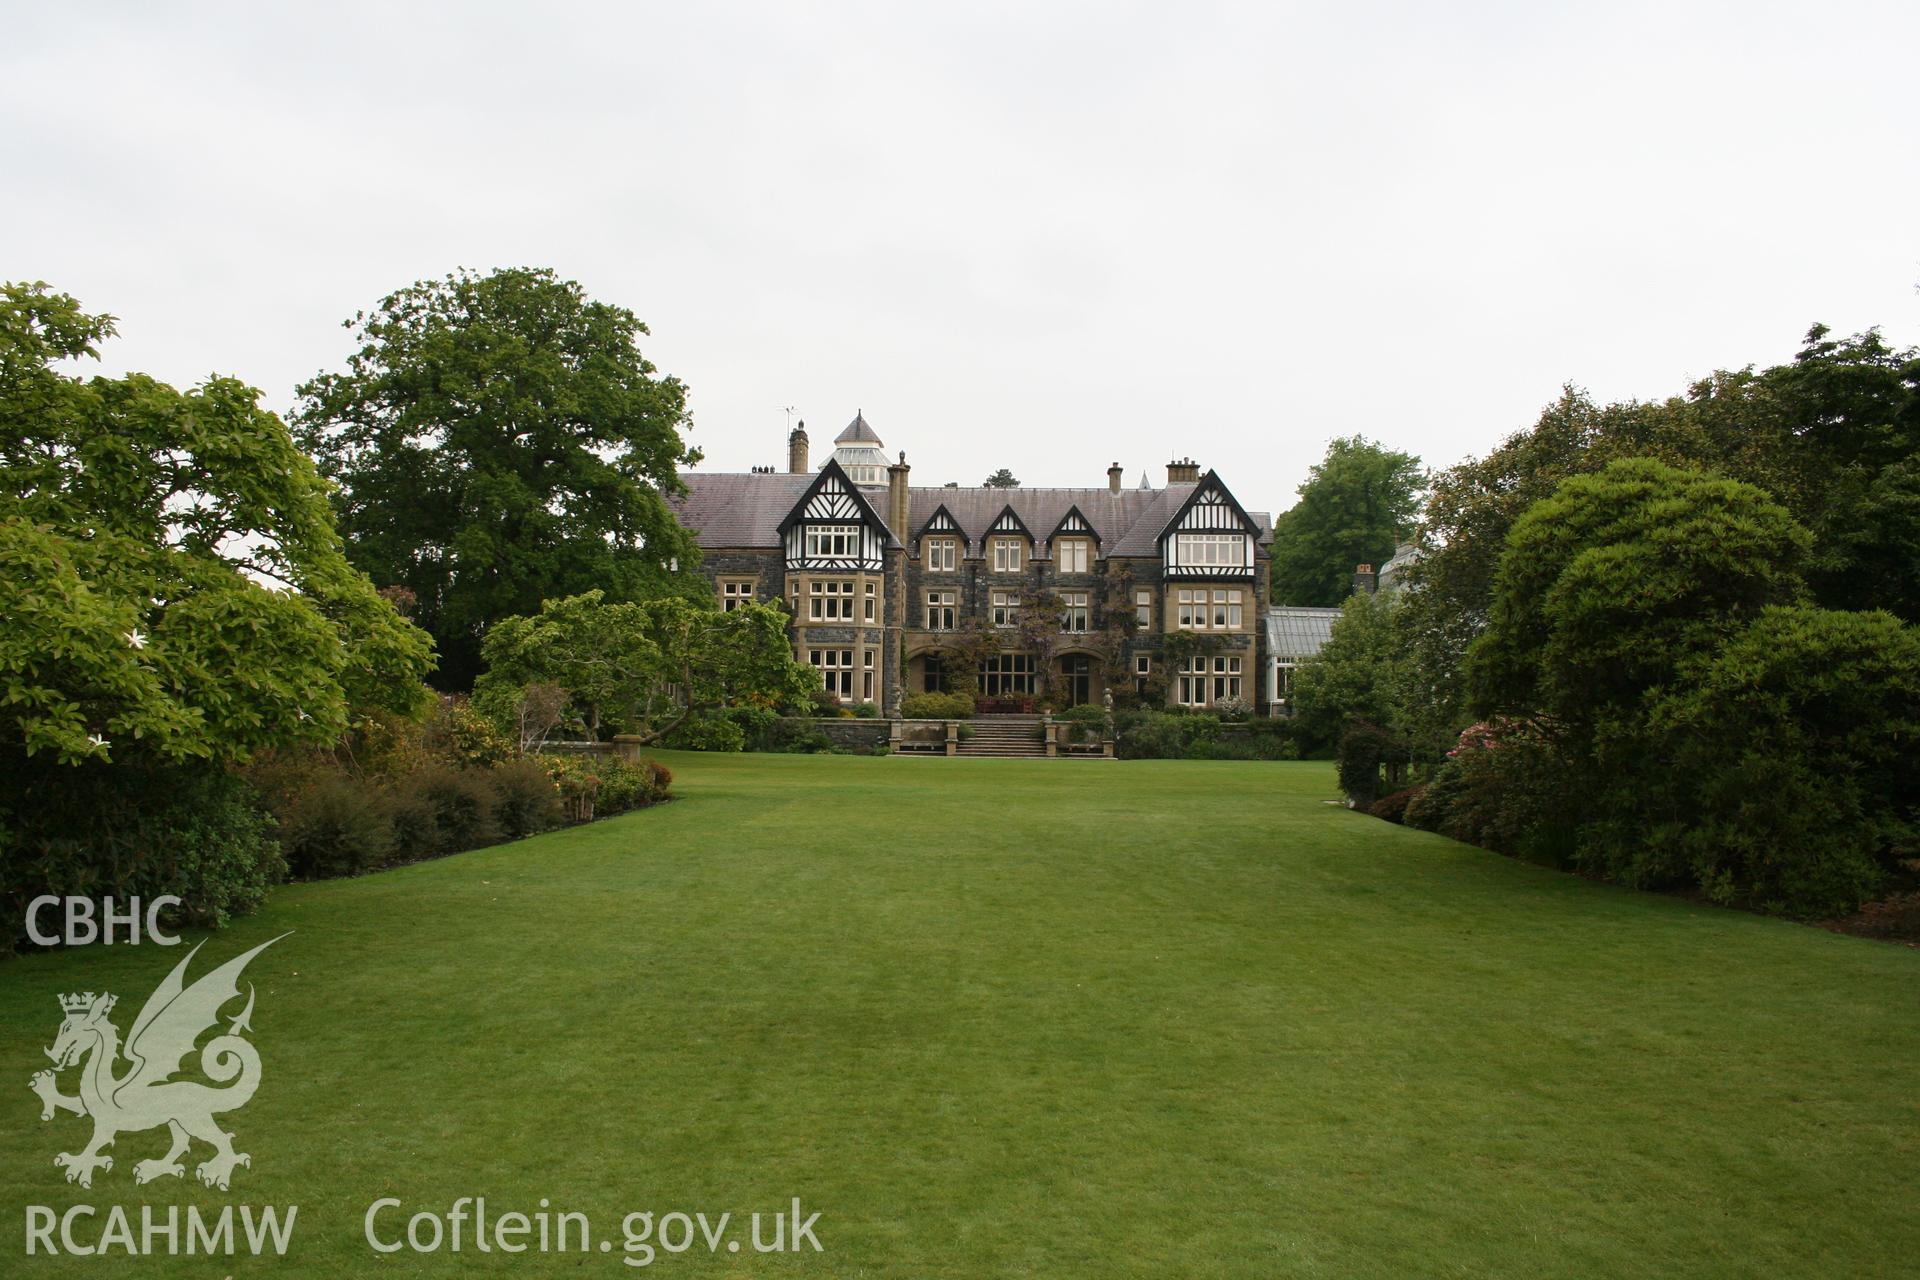 South fa?ade of Bodnant House (nprn 26804) looking over the main lawn.